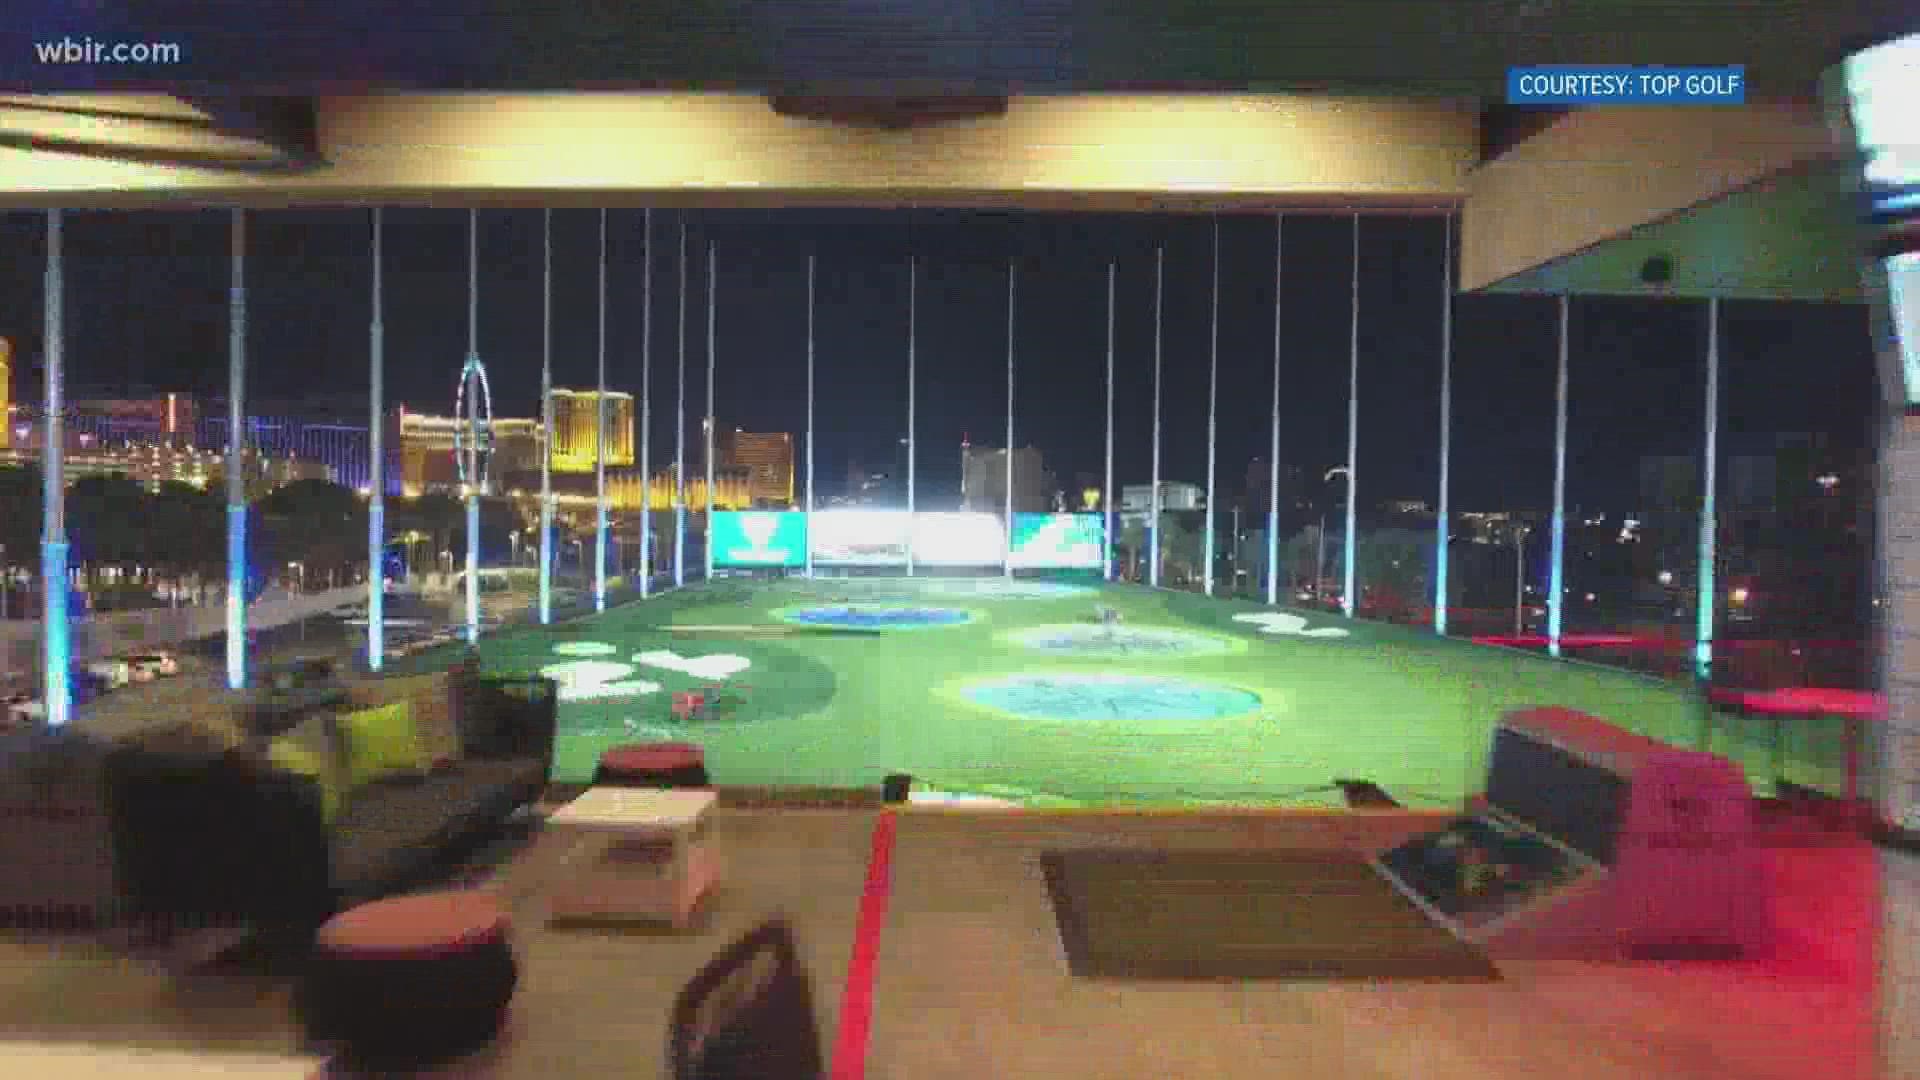 "Topgolf will be an economic driver that will result in increased sales tax revenue, new jobs and new businesses to the area," Farragut Mayor Ron Williams said.